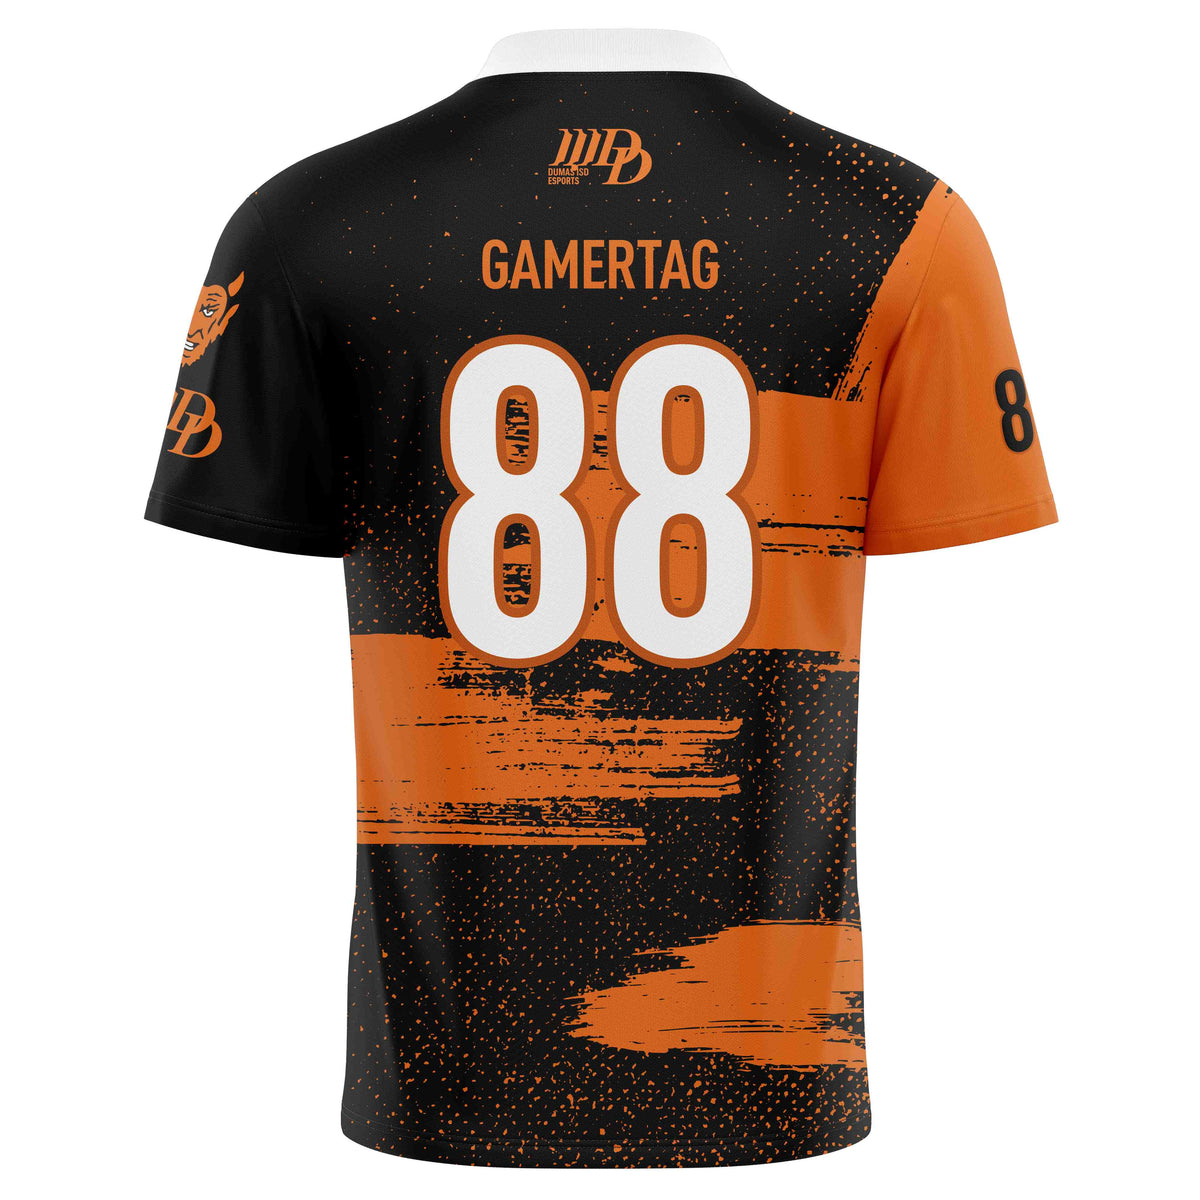 DOW ESPORTS Official premium Jersey - M